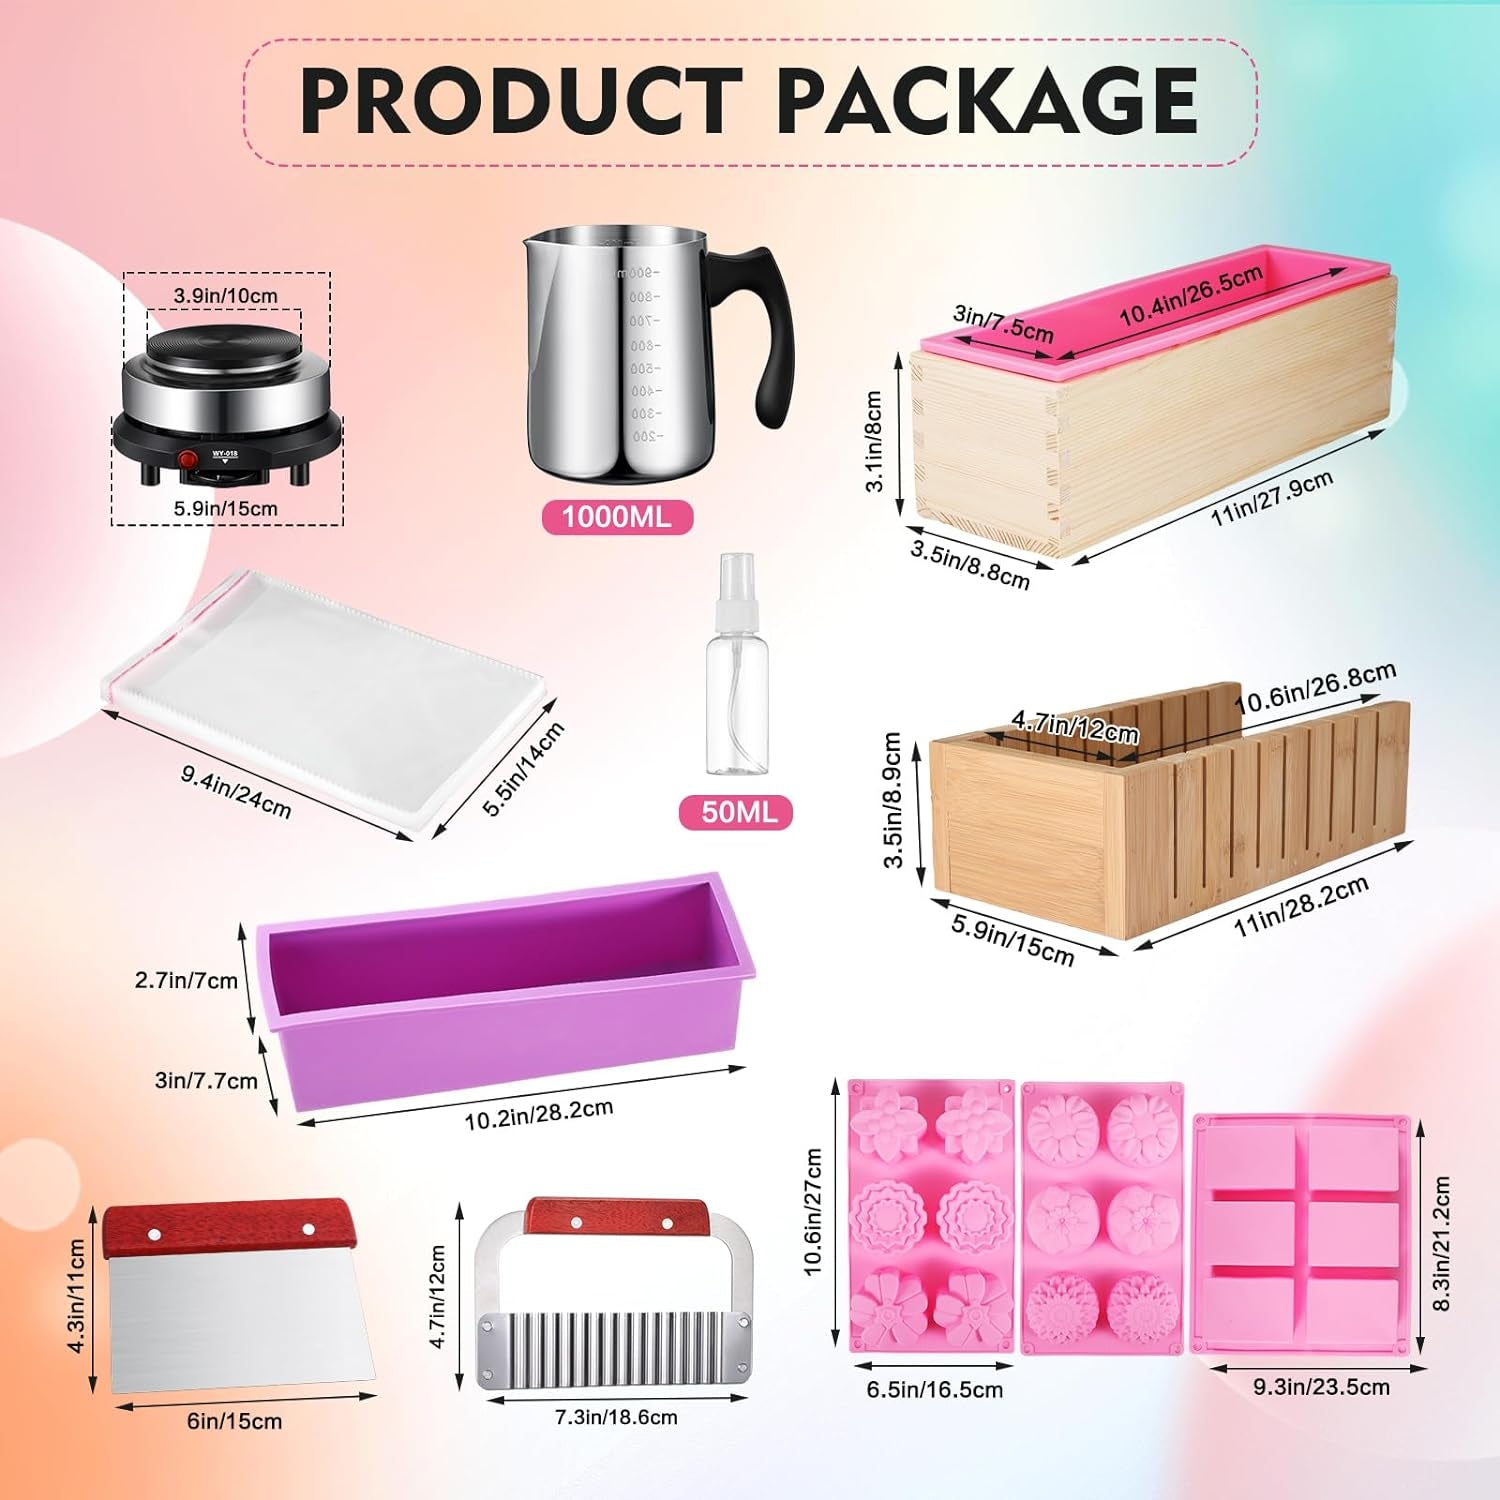 17 Pcs Soap Making Kit Includes Silicone Mold Wooden Box Soap Cutter Mold Electronic Hot Plate Cutter Measuring Tools DIY Soap Making Tools for Adults Beginners (European Plug)